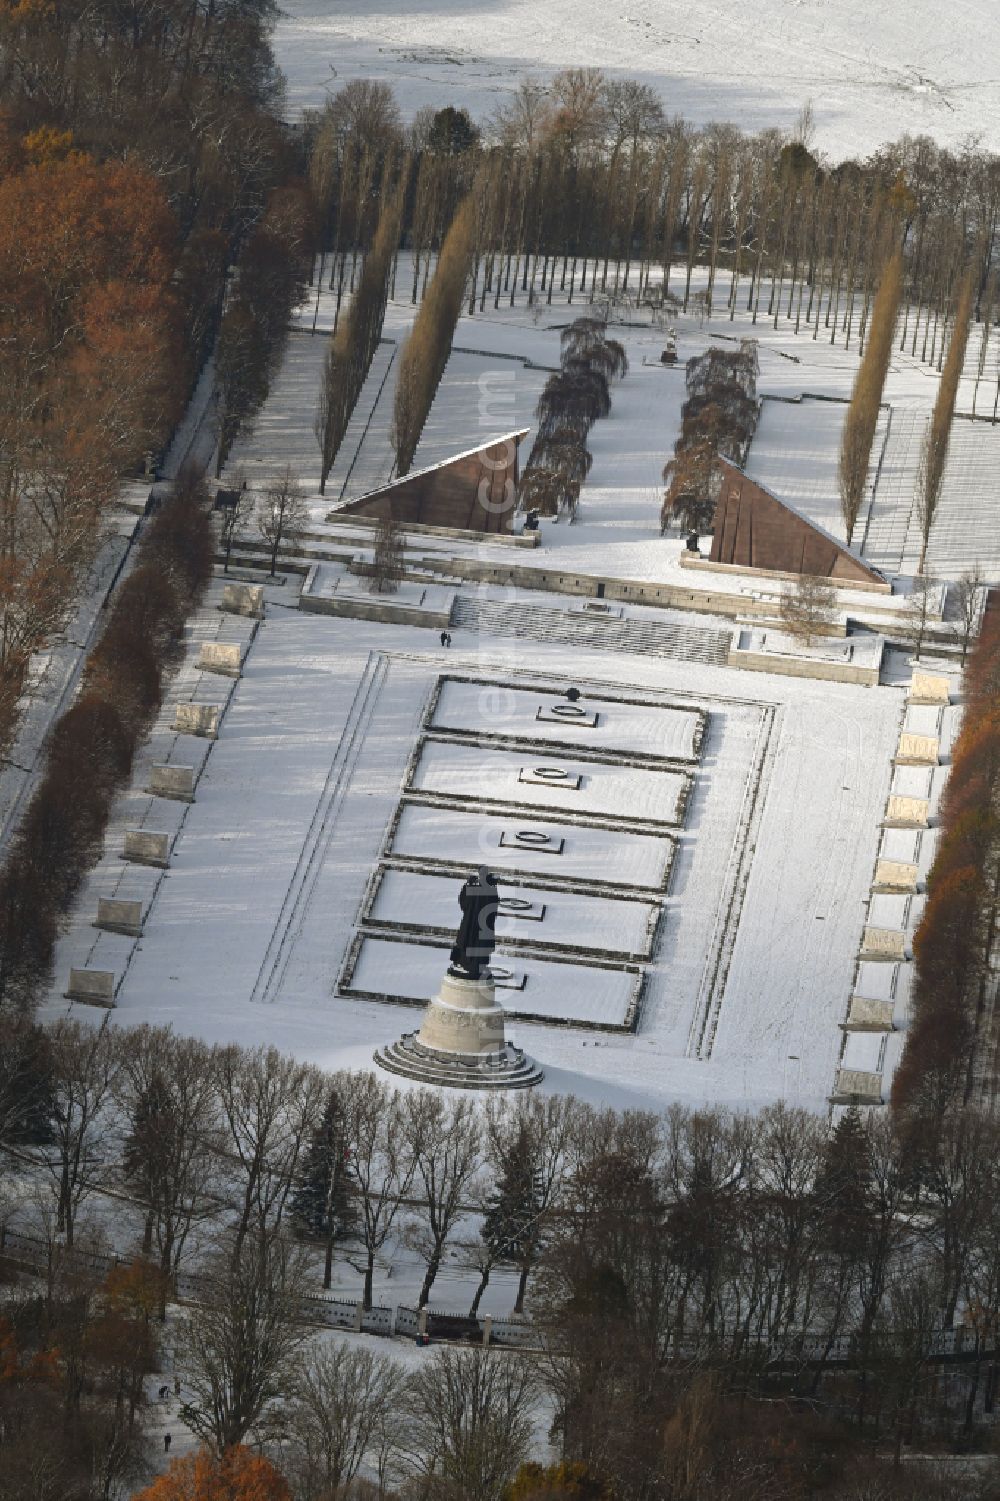 Berlin from above - Wintry snowy tourist attraction of the historic monument Sowjetisches Ehrenmal Treptow in Berlin, Germany